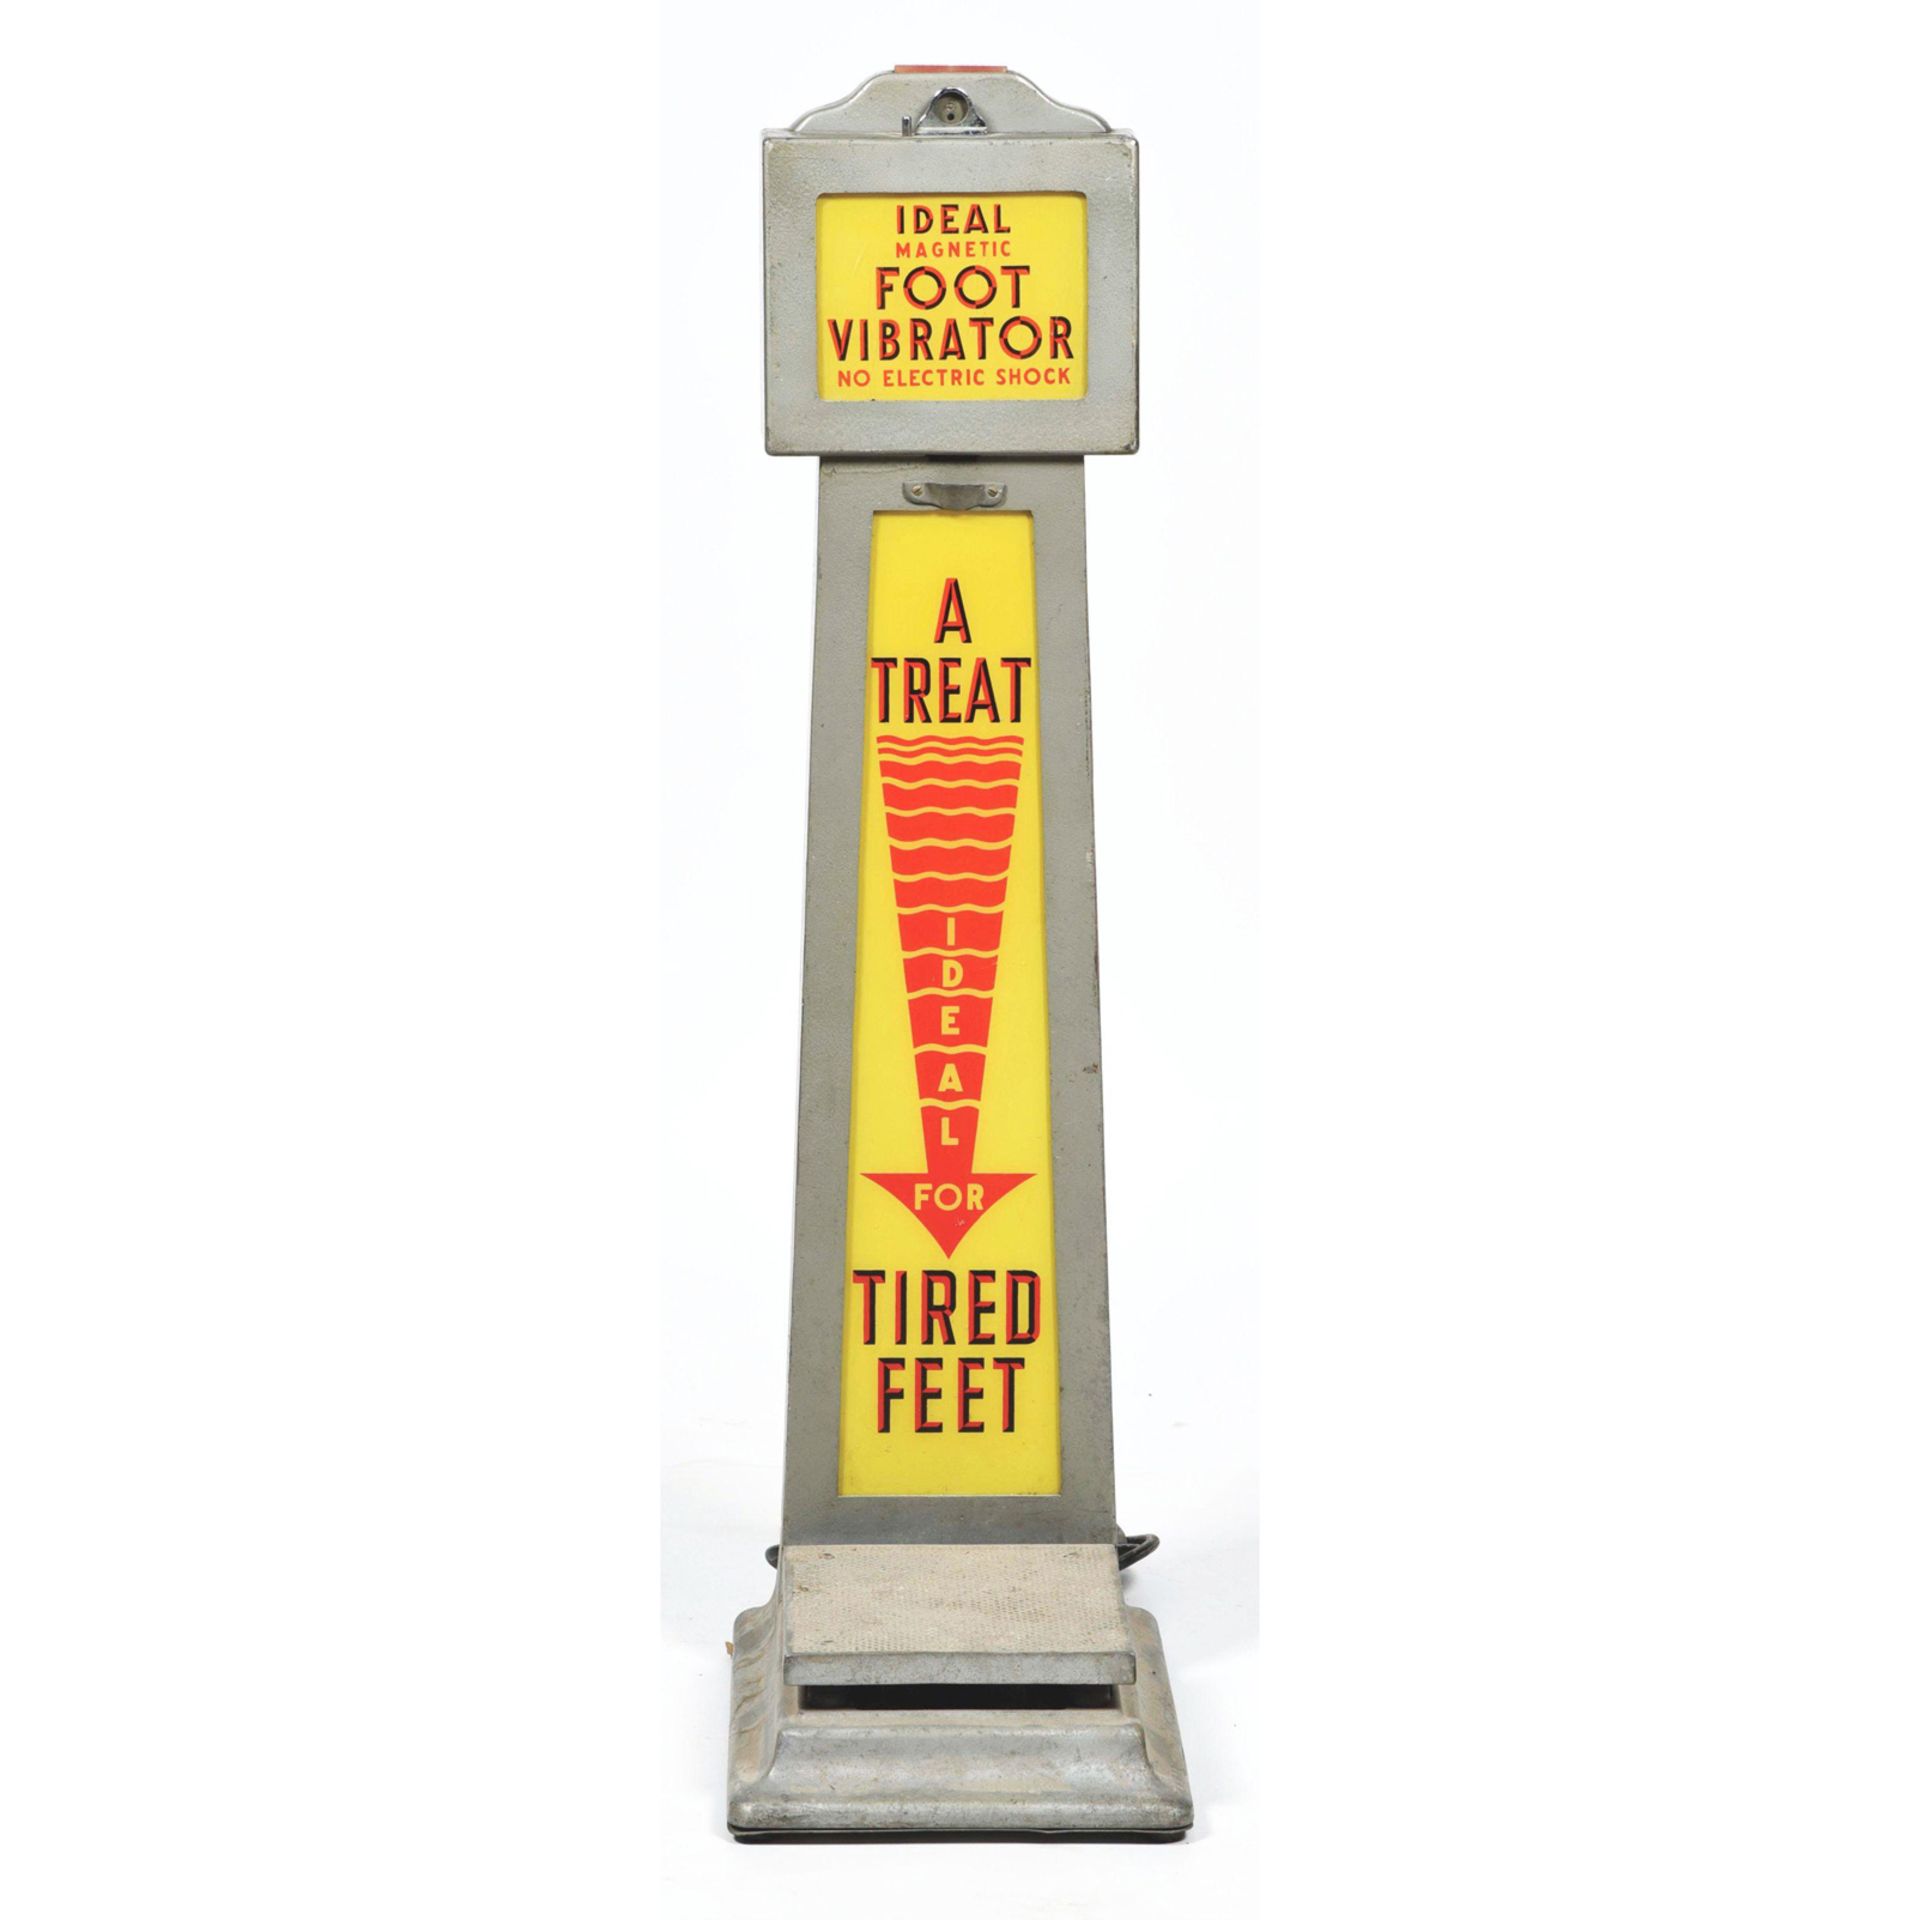 5¢ Ideal Magnetic Foot Vibrator ca. 1950 - Image 2 of 6